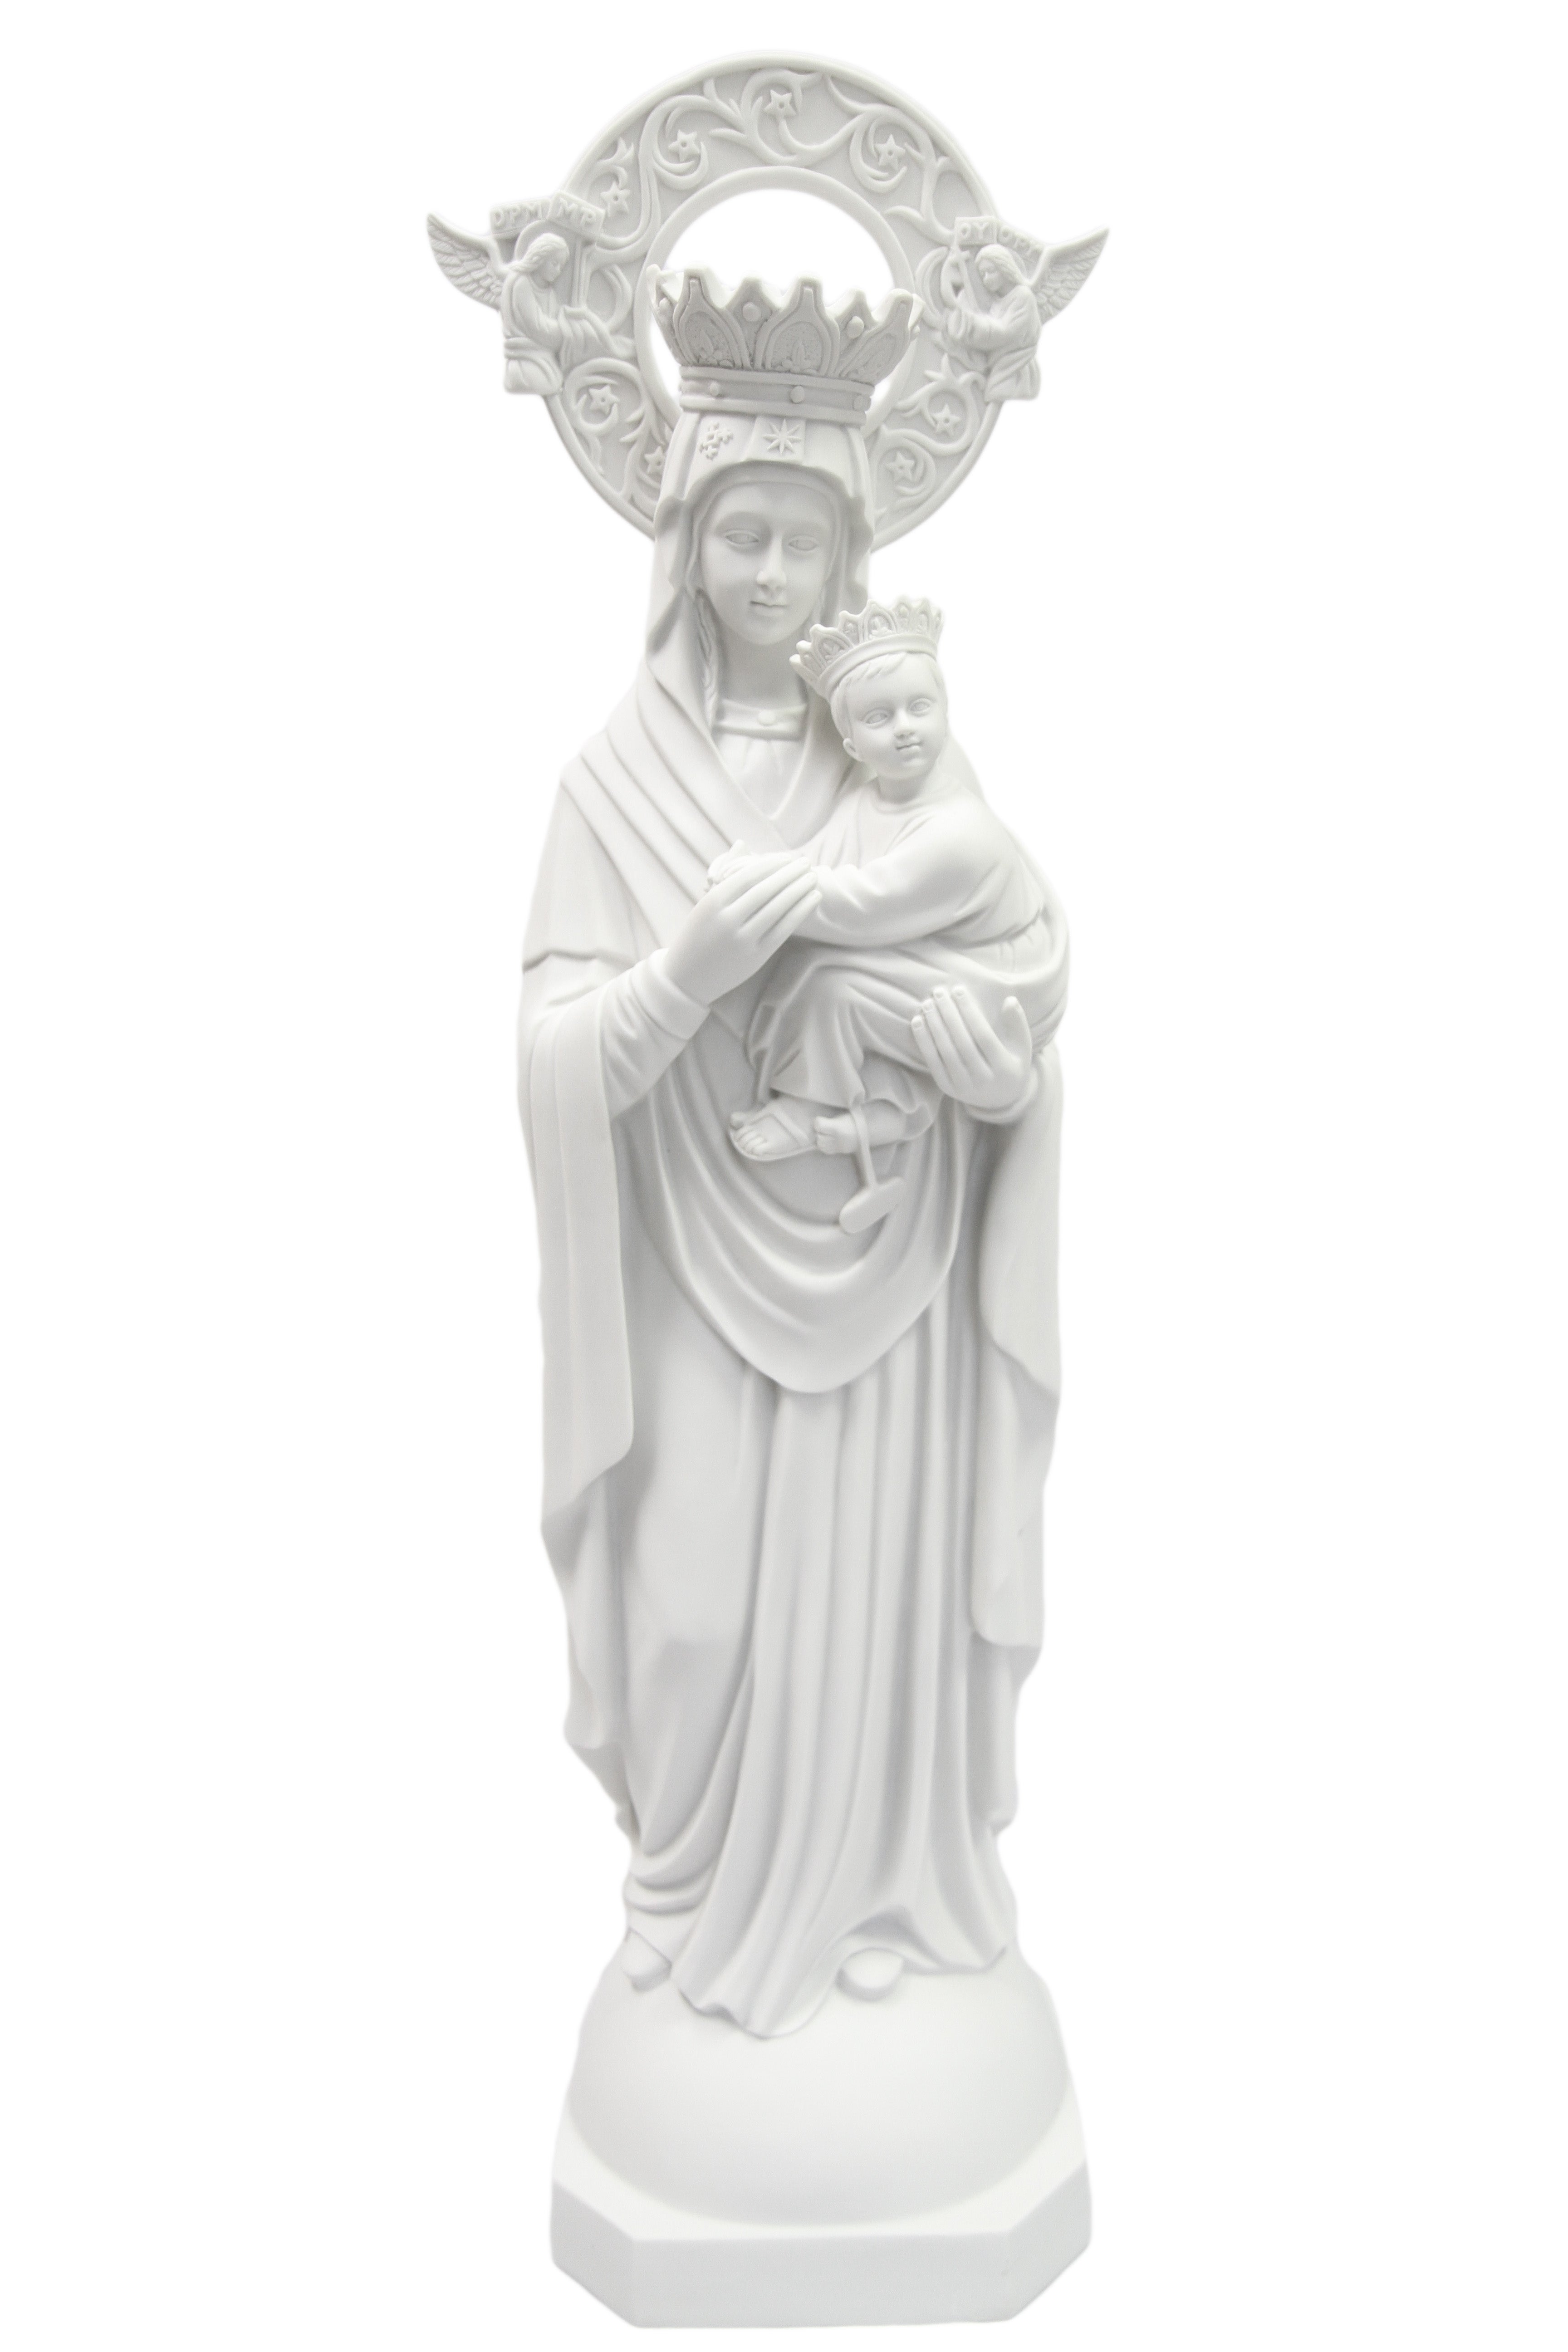 35 Inch Our Lady of Perpetual Help Catholic Statue Sculpture Figurine